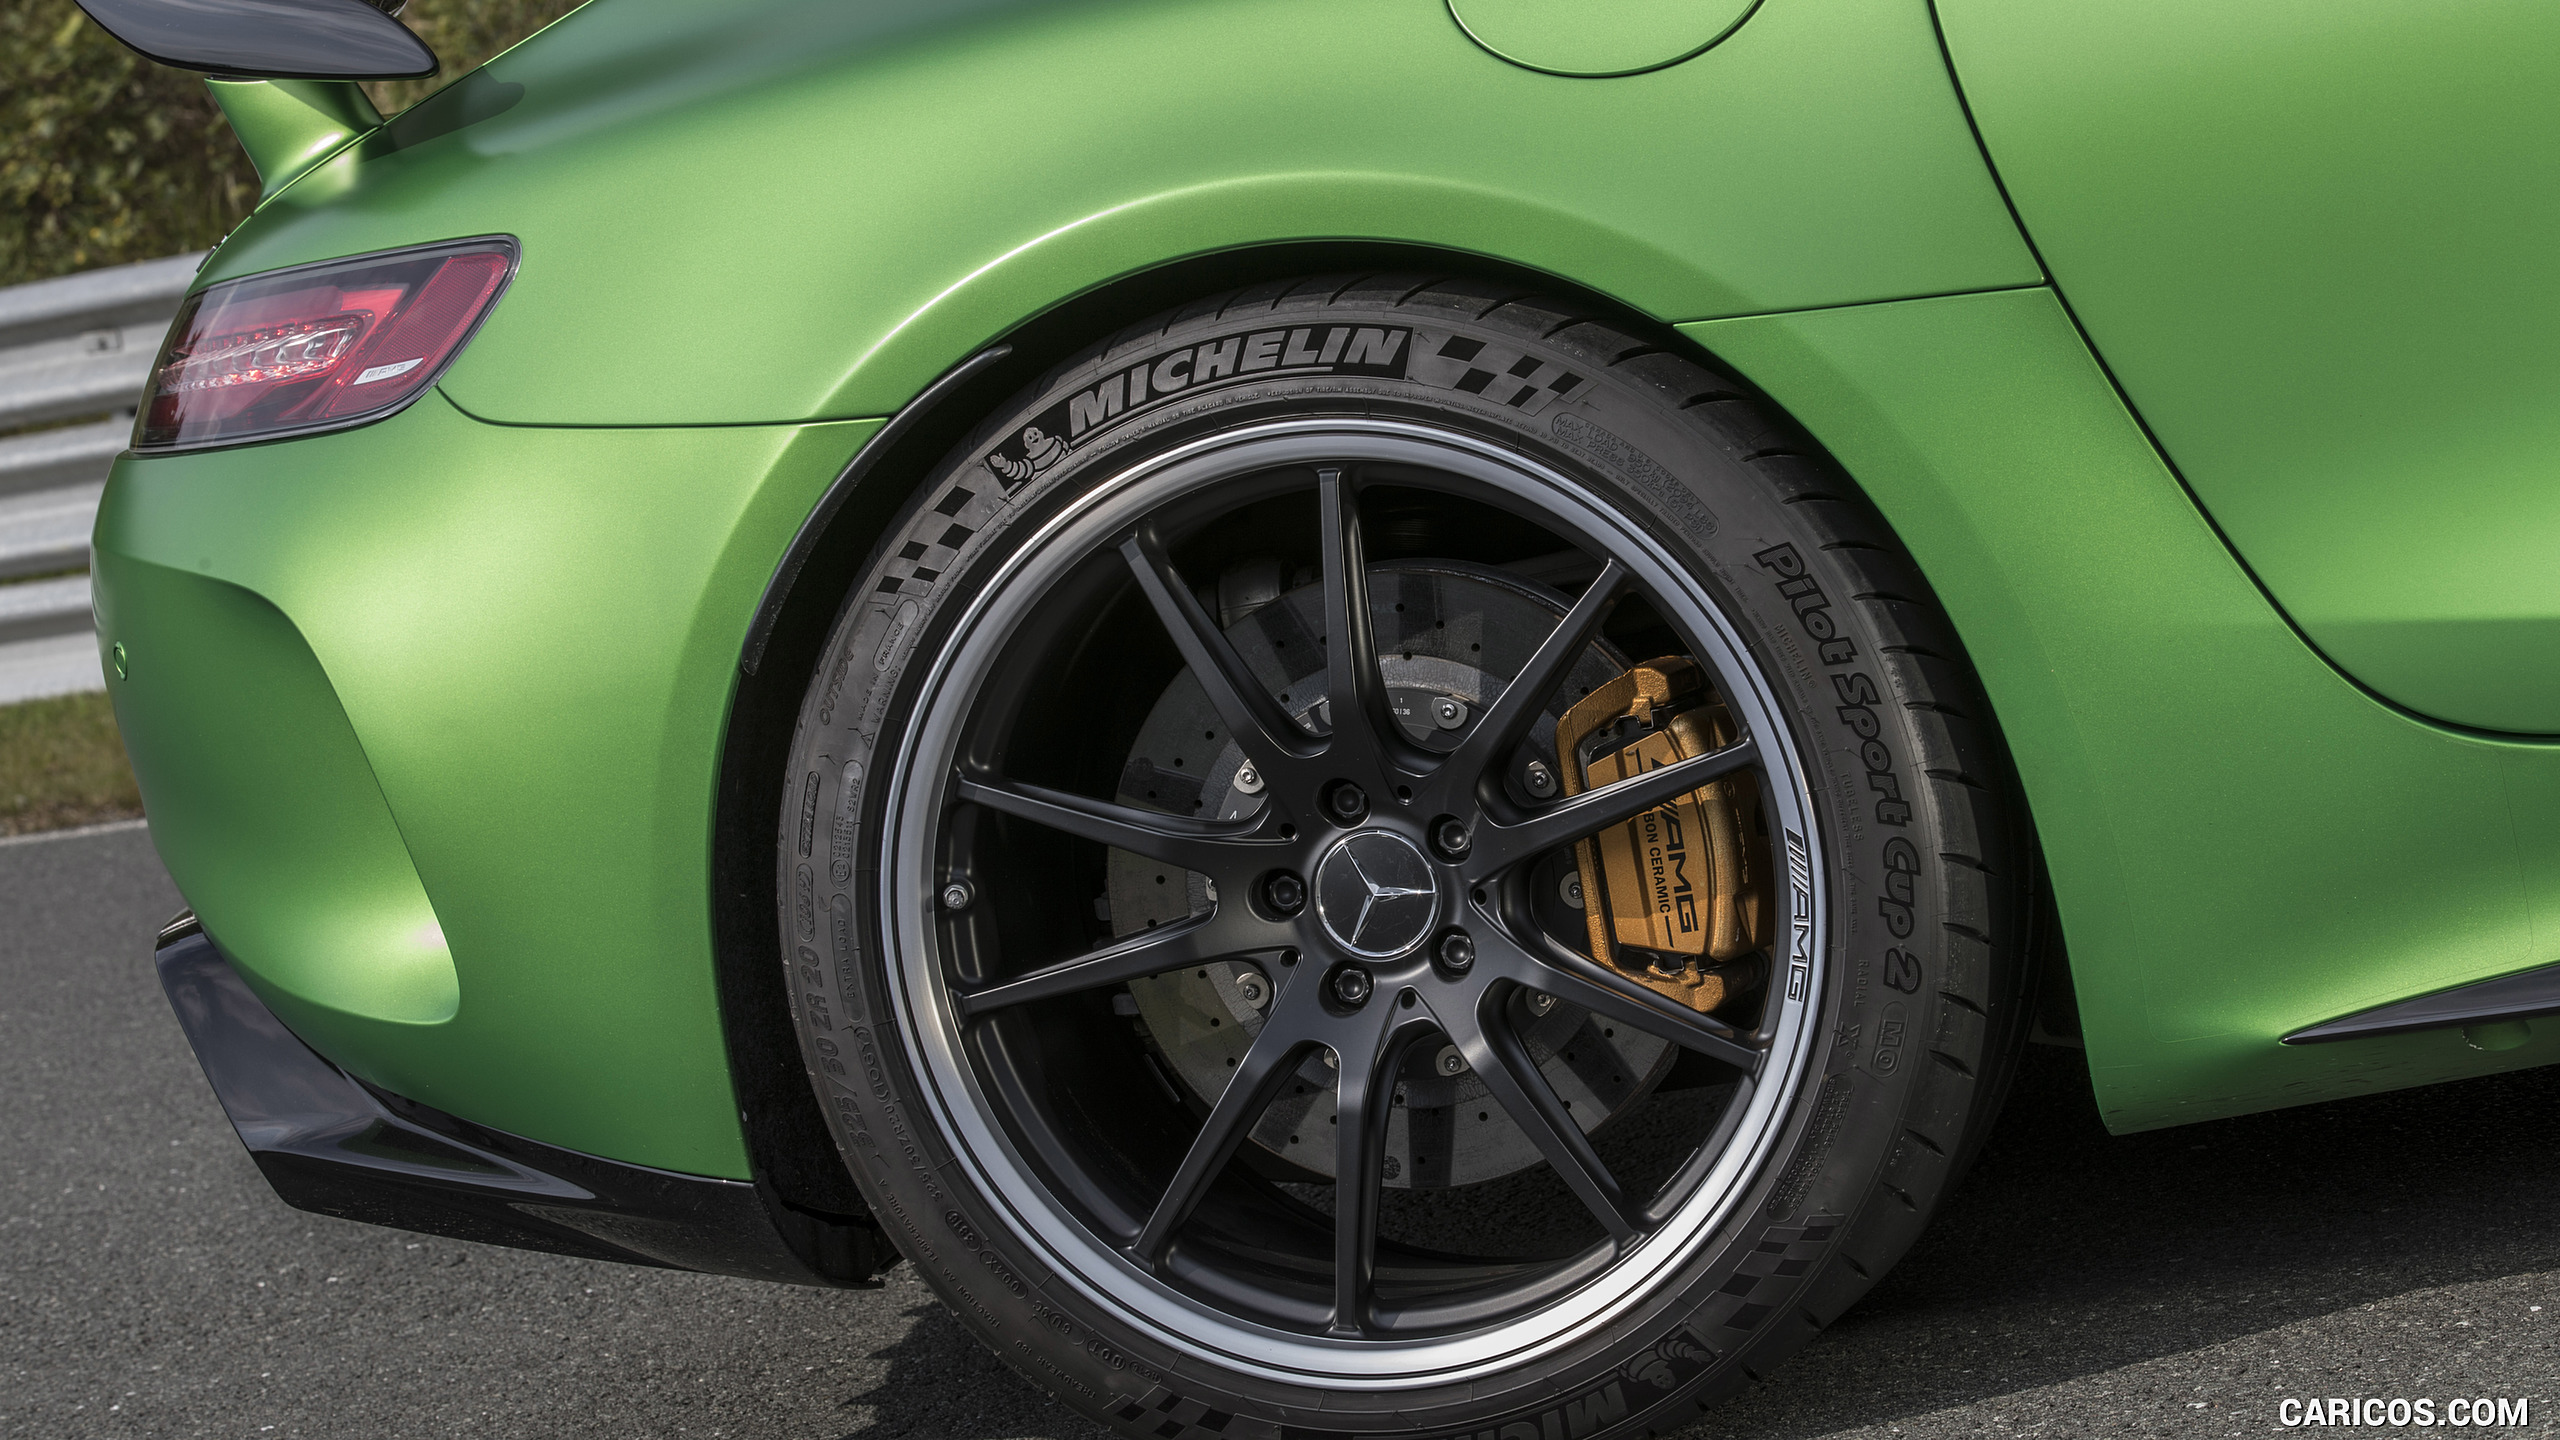 2017 Mercedes-AMG GT R Coupe - Wheel, #174 of 182